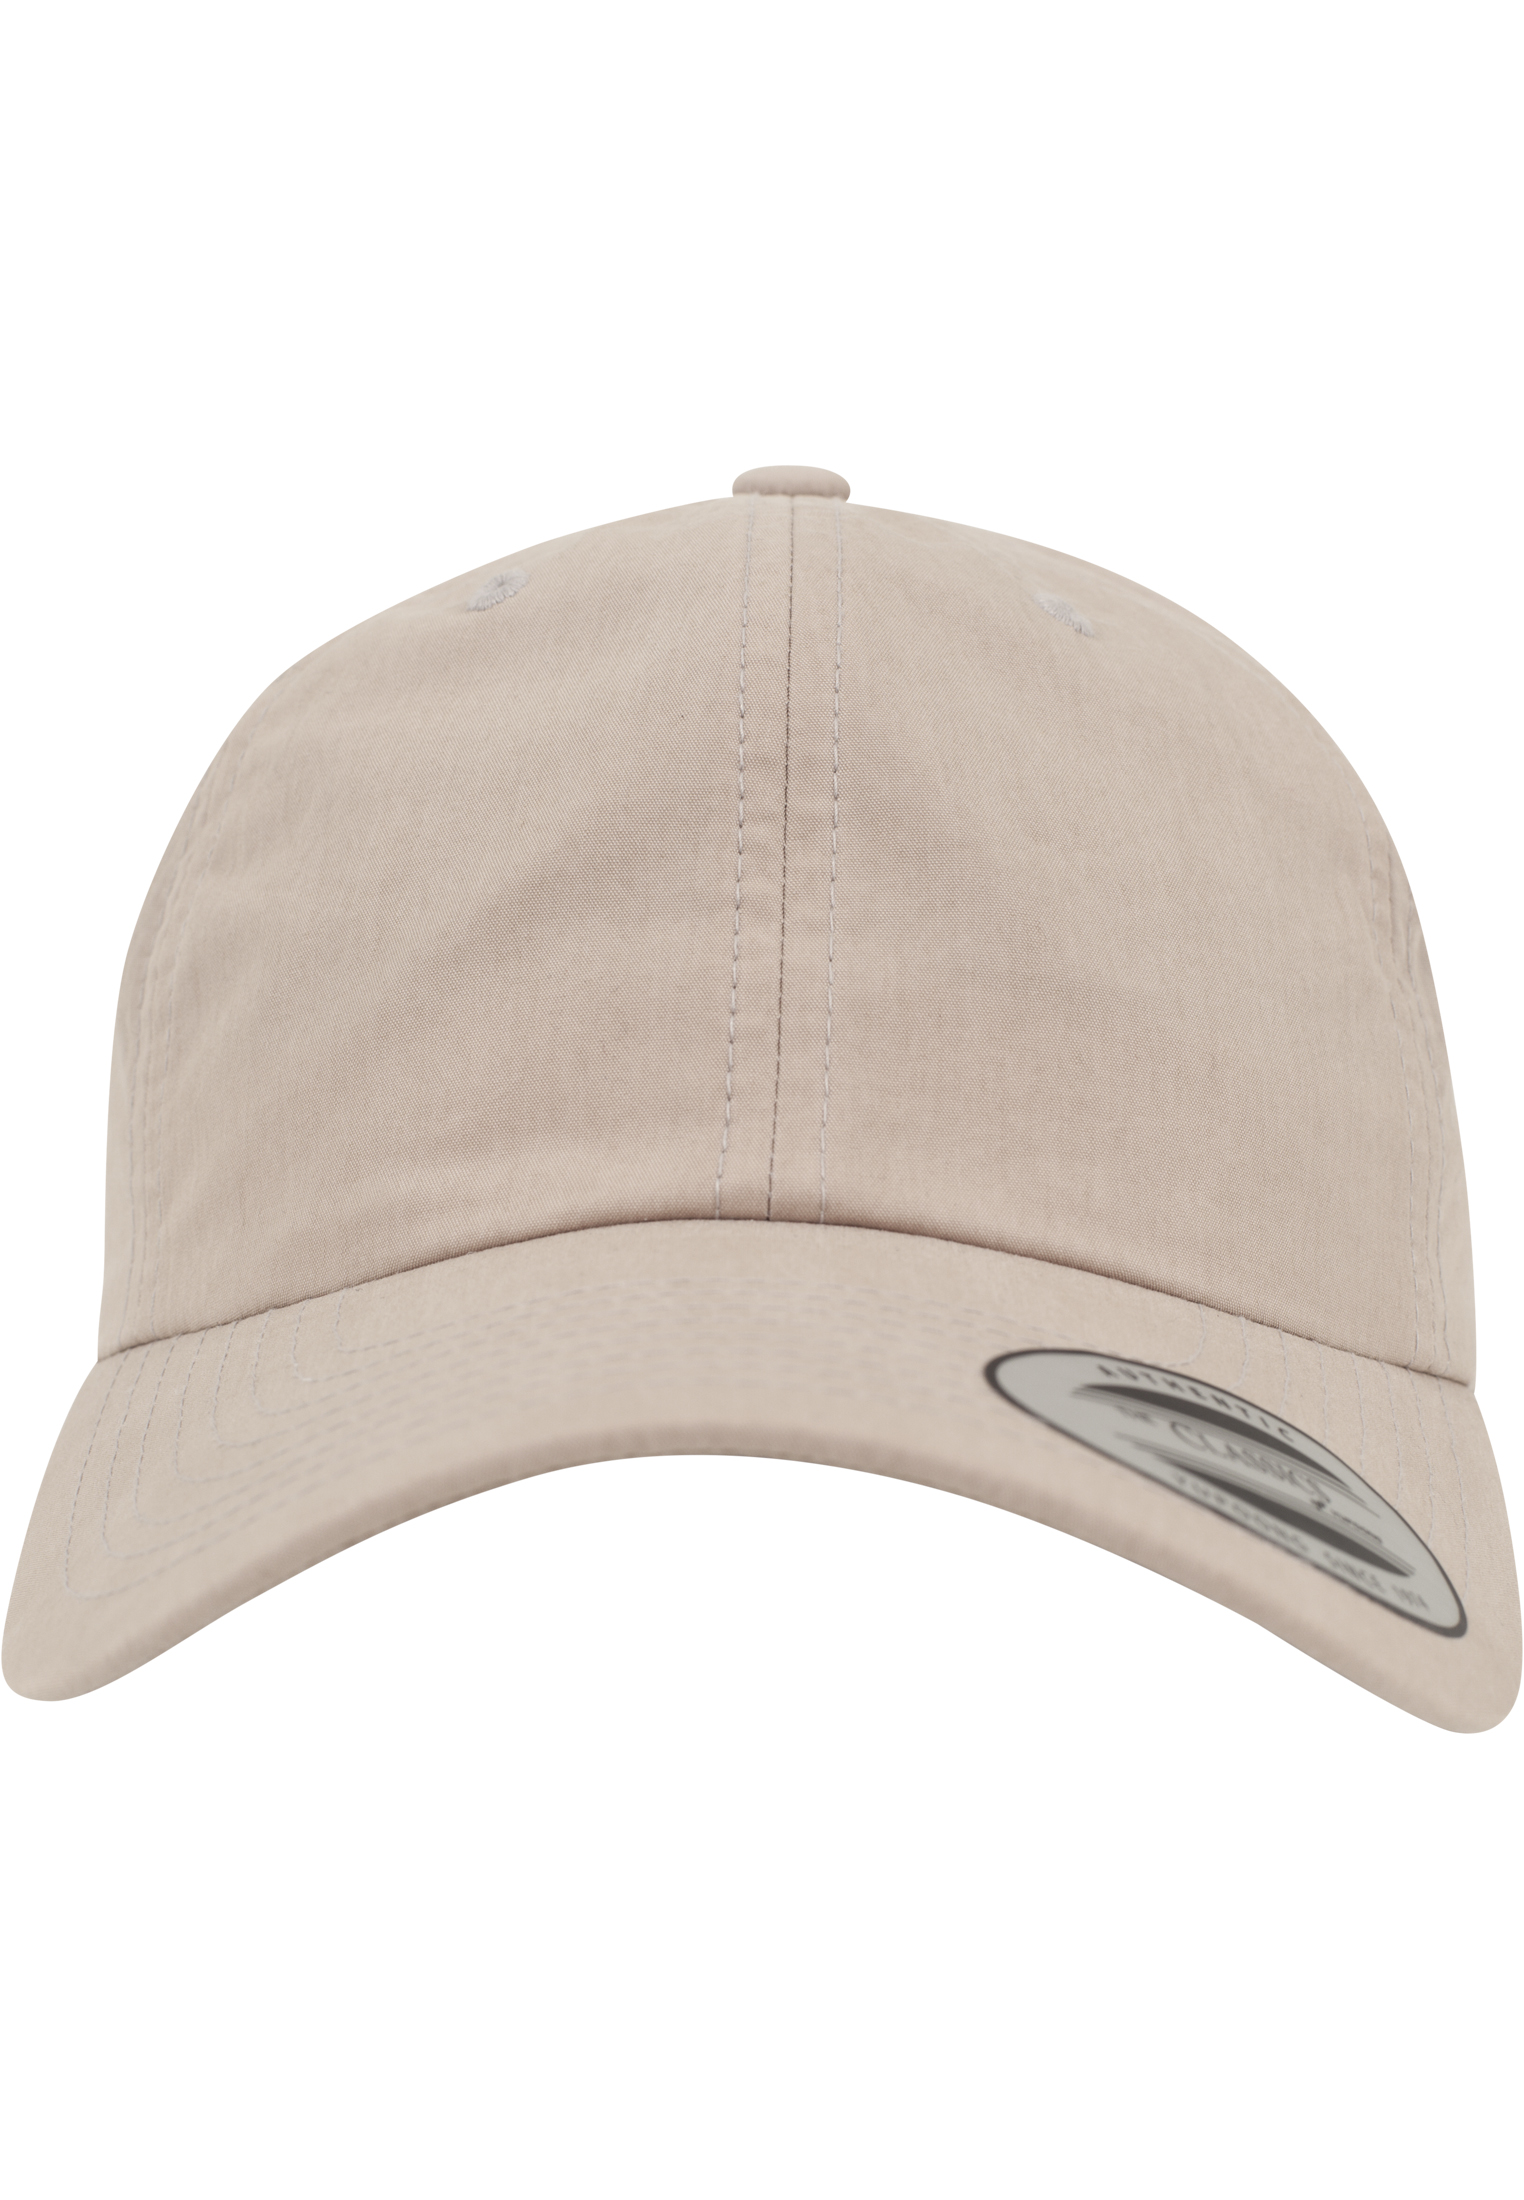 Low Washed Cap-6245W Profile